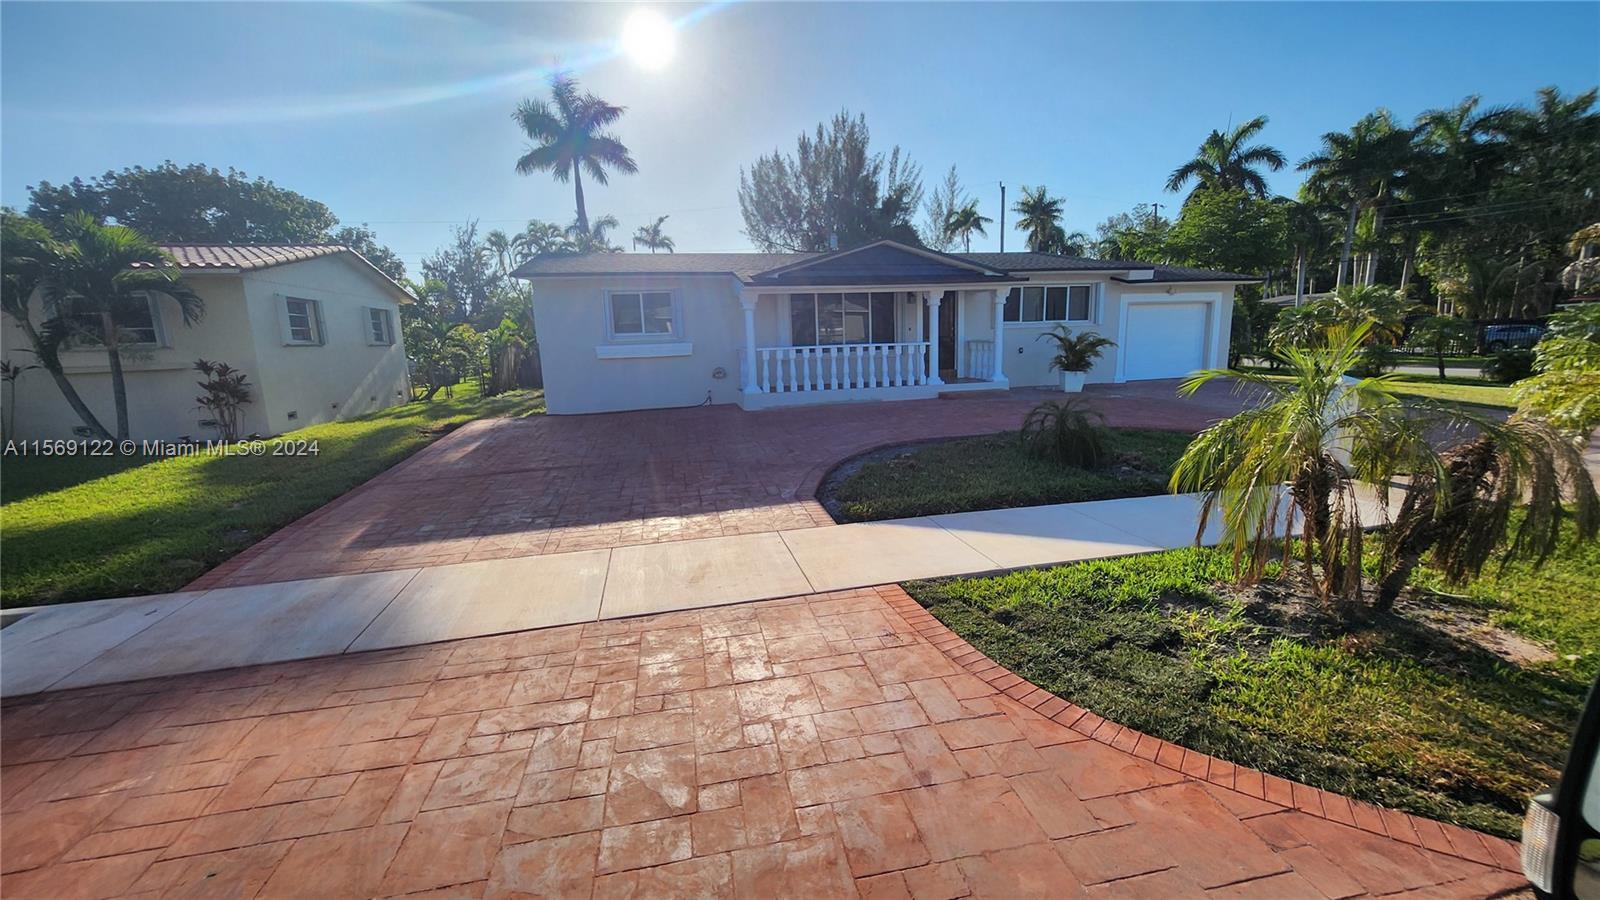 Photo of 15630 NW 2nd Ct in Miami, FL